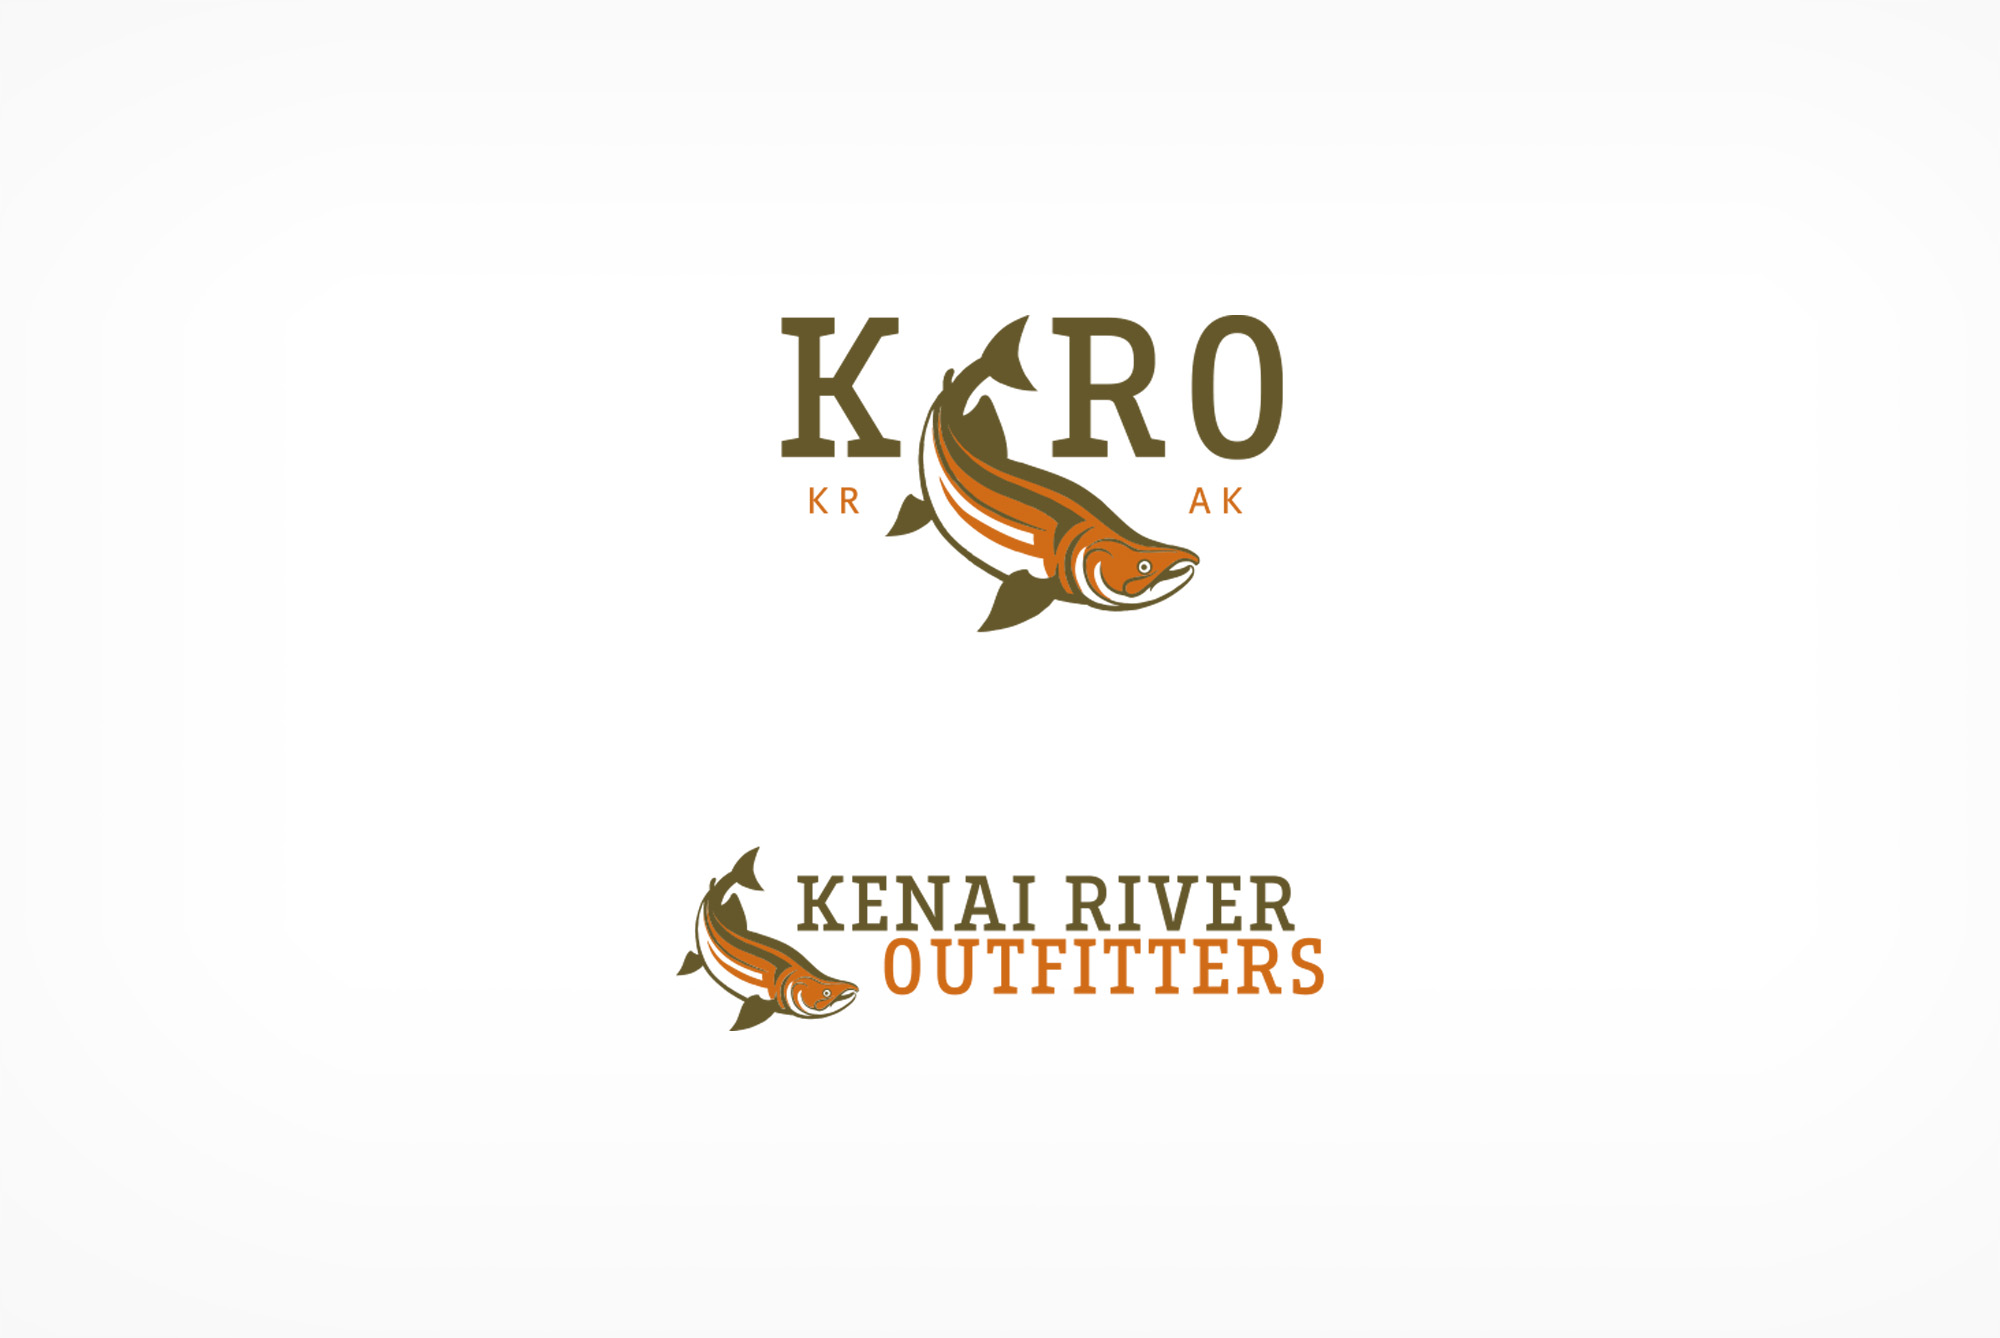 Secondary brand logos for Kenai River Outfitters.